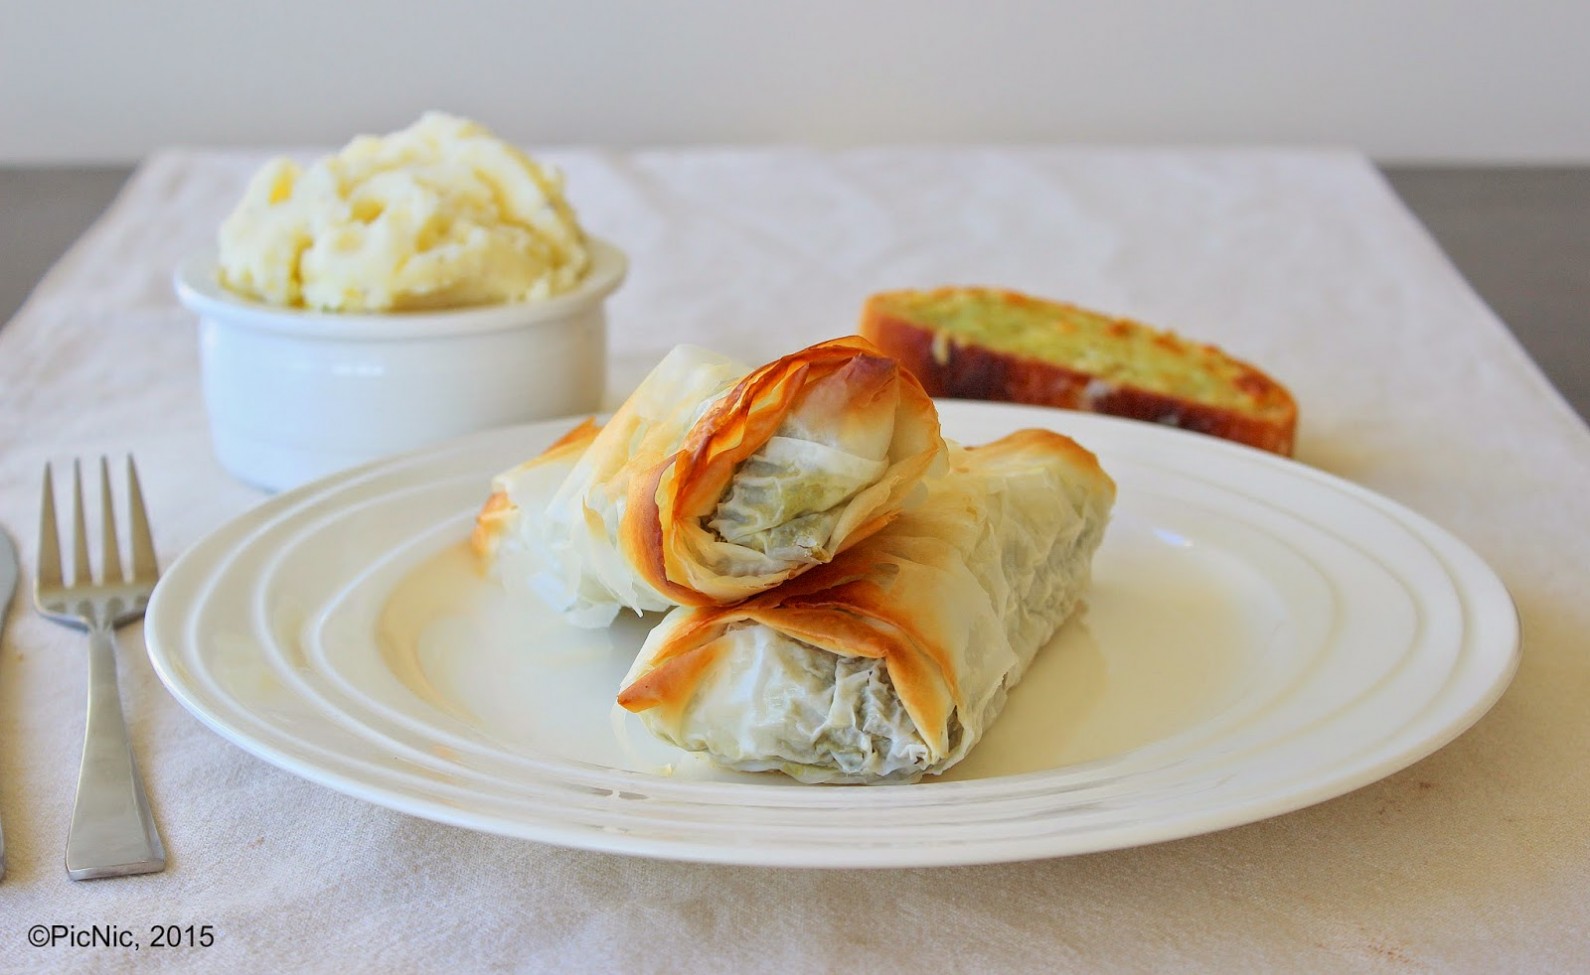 Chicken and Spinach Filo Parcels